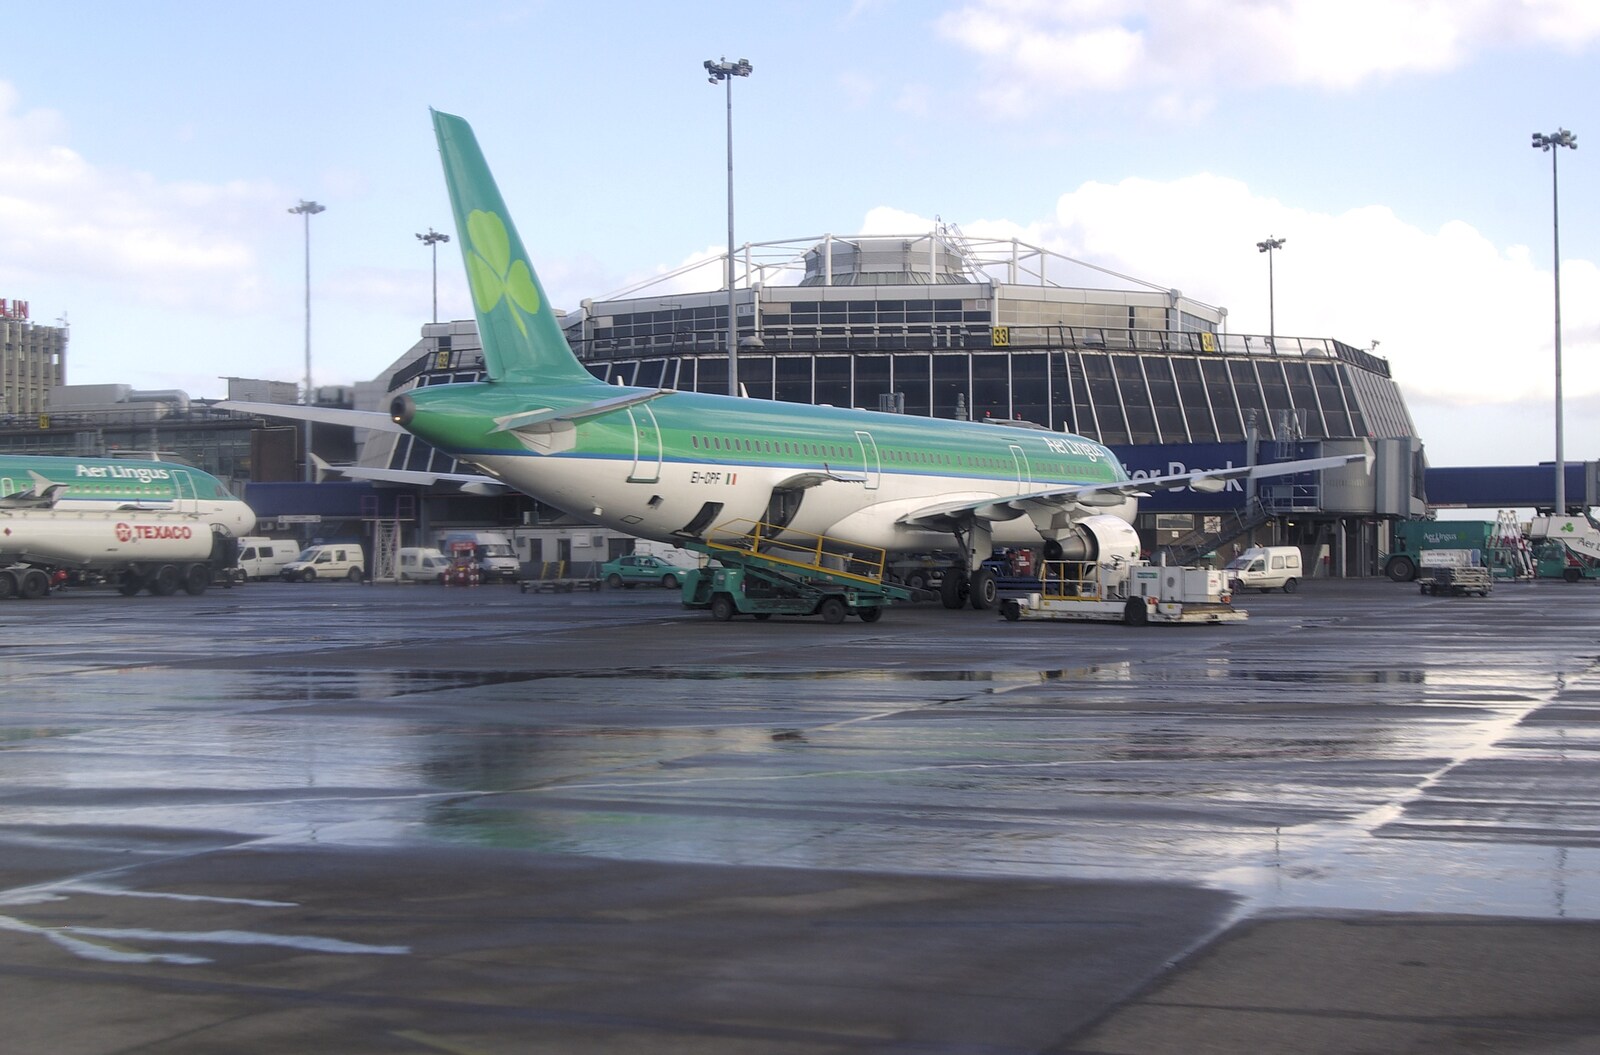 An Aer Lingus 737 on the ground at Dublin from Easter in Dublin, Ireland - 21st March 2008